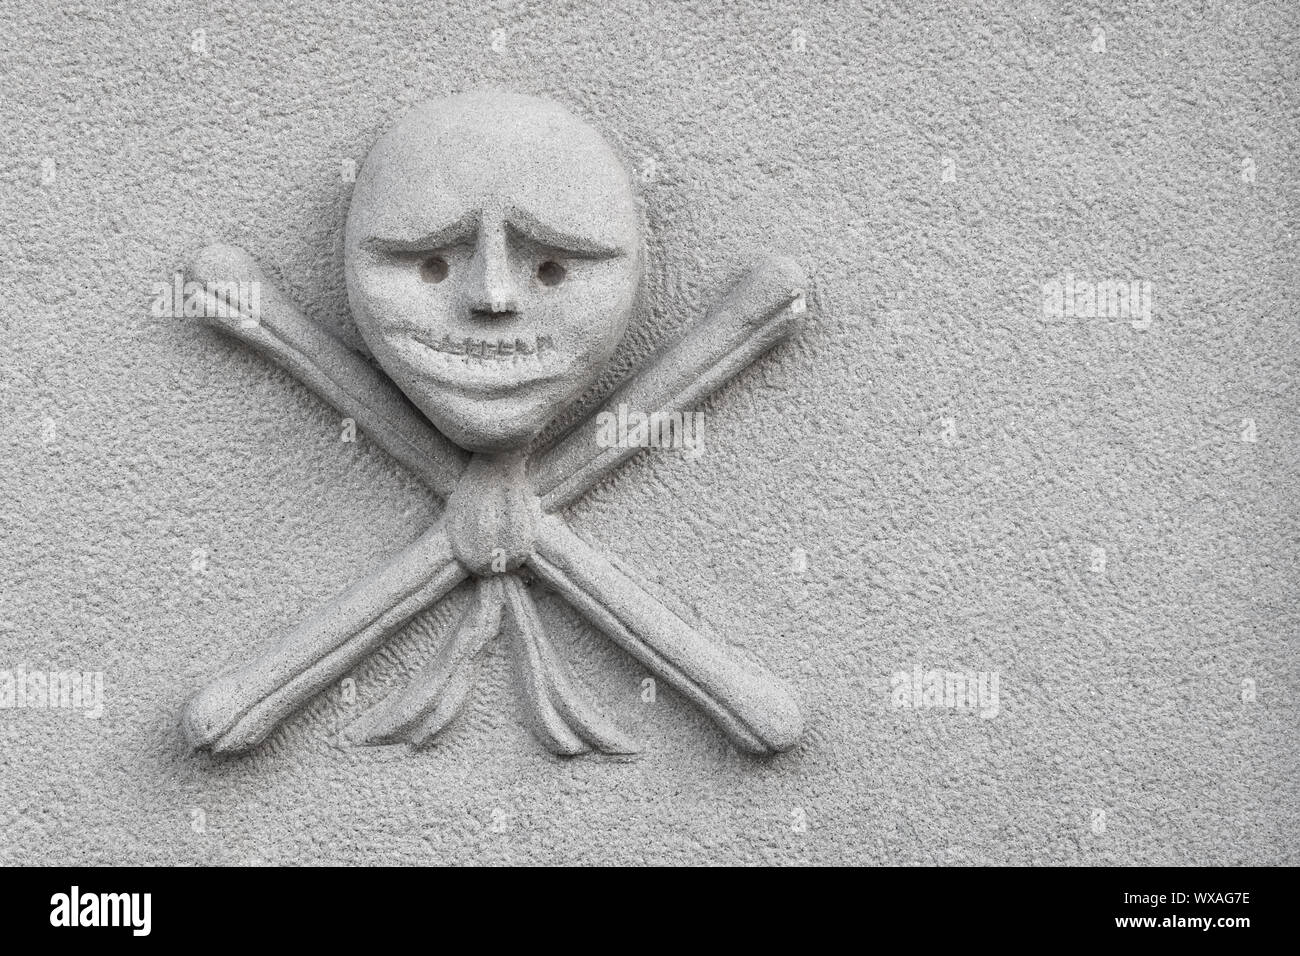 Skull and crossed bones carved on an new stone Stock Photo